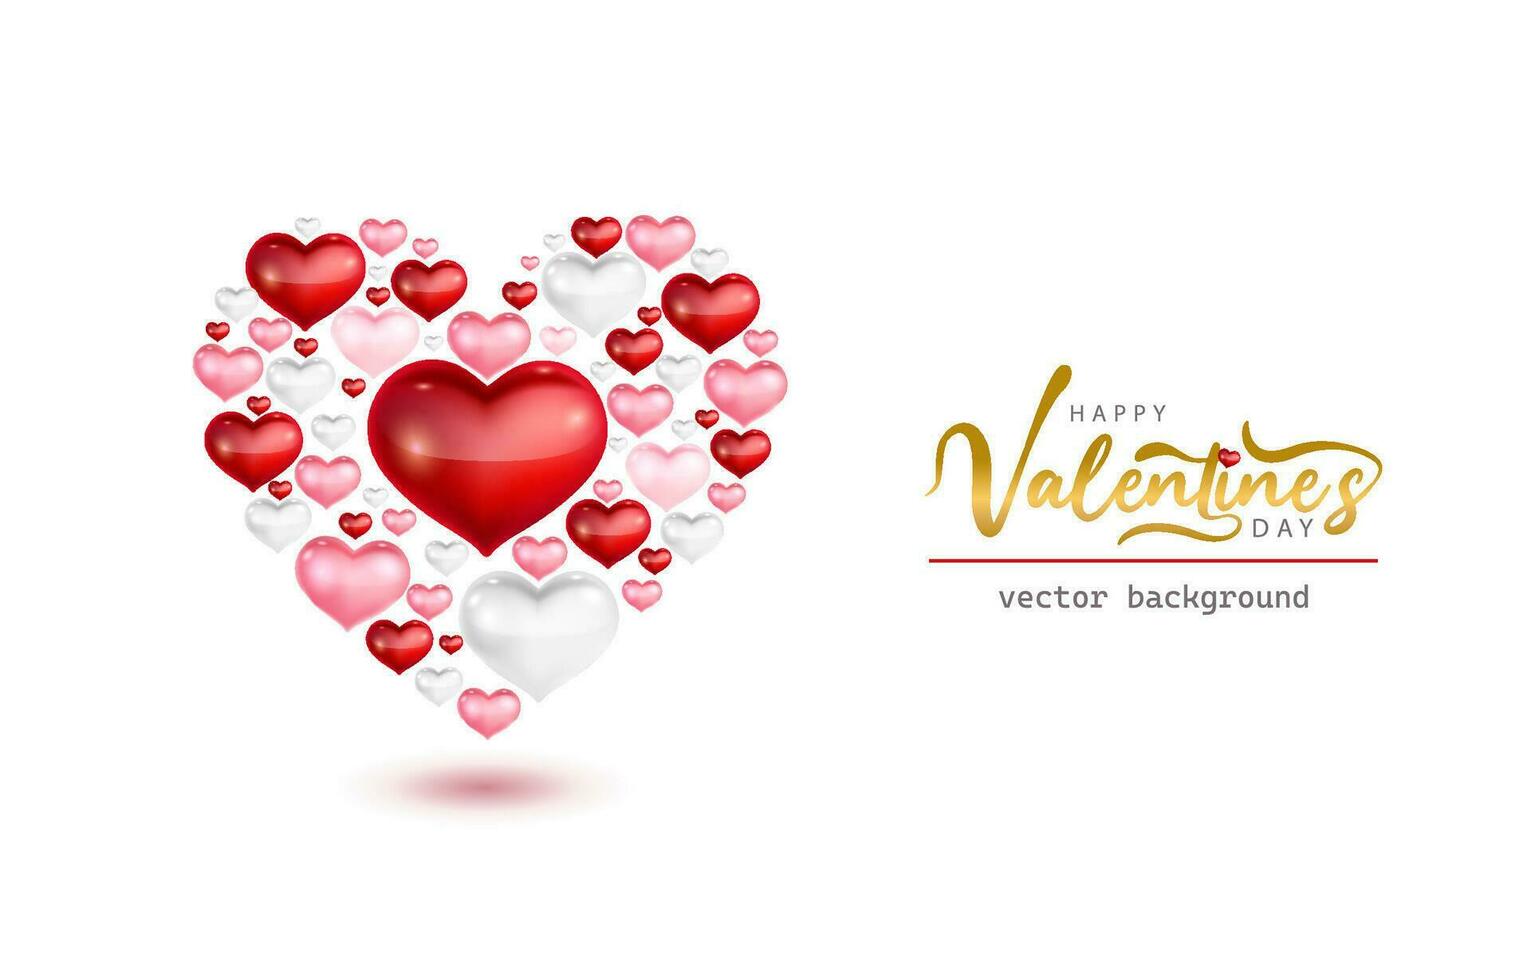 Beautiful Happy Valentine's Day background vector